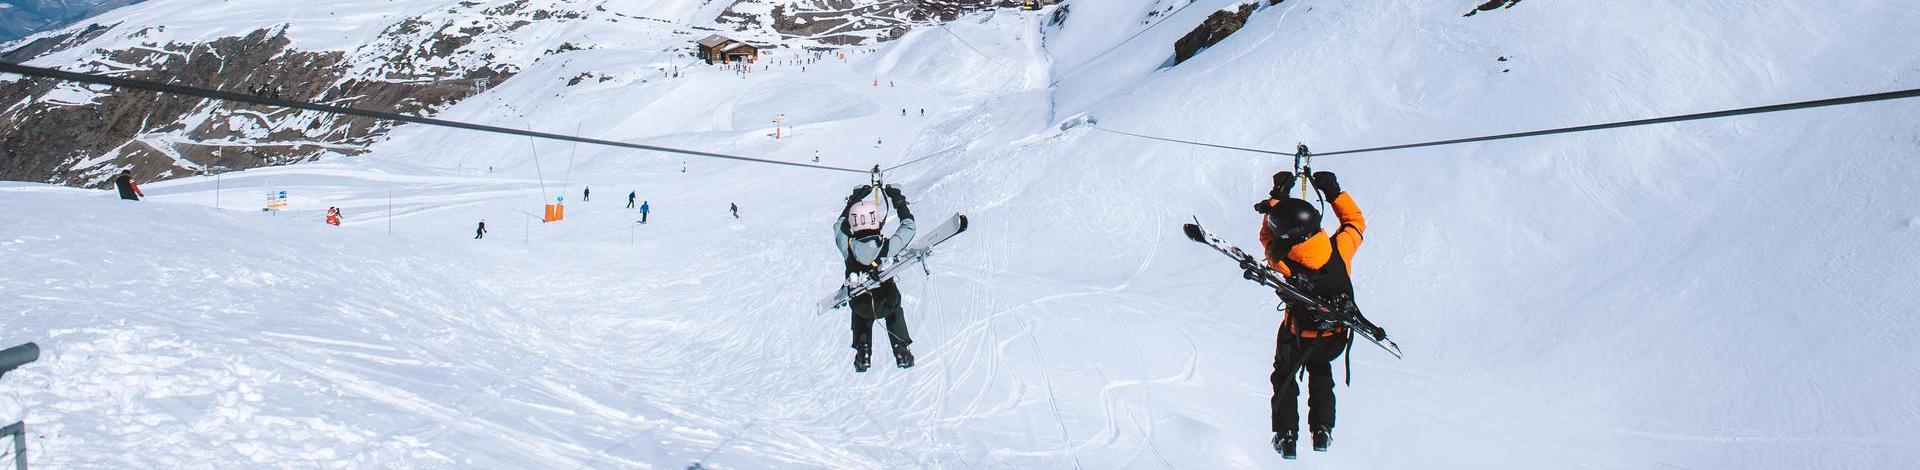 The zipline in Orelle, located between Val Thorens and Orelle: thrilling and dizzying sensations